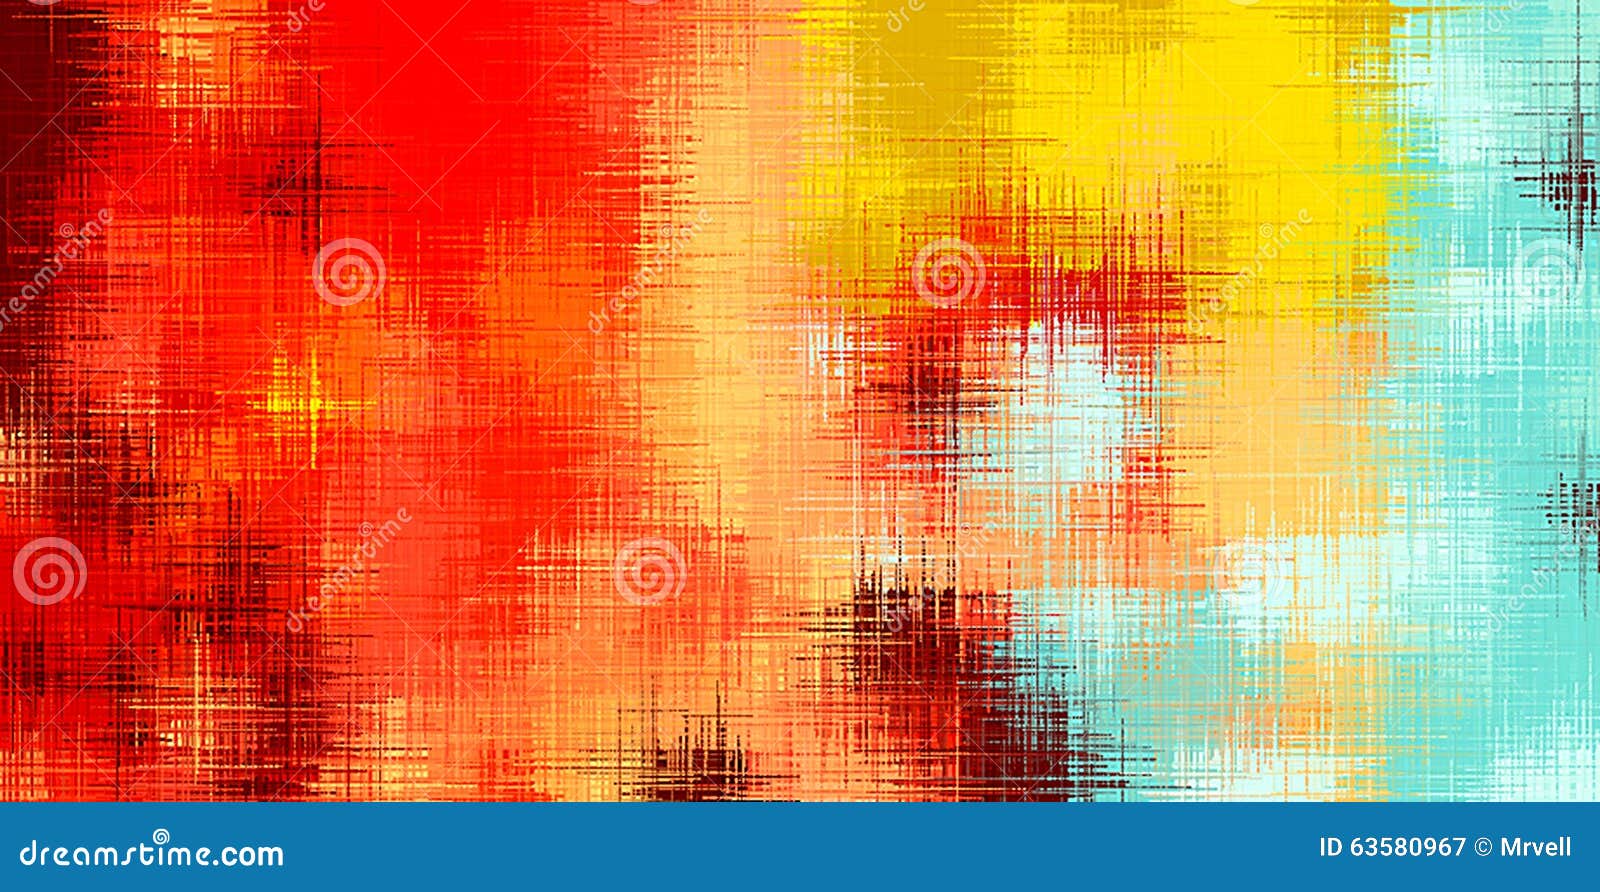 Red Yellow Brown and Blue Painting Abstract Stock Illustration ...